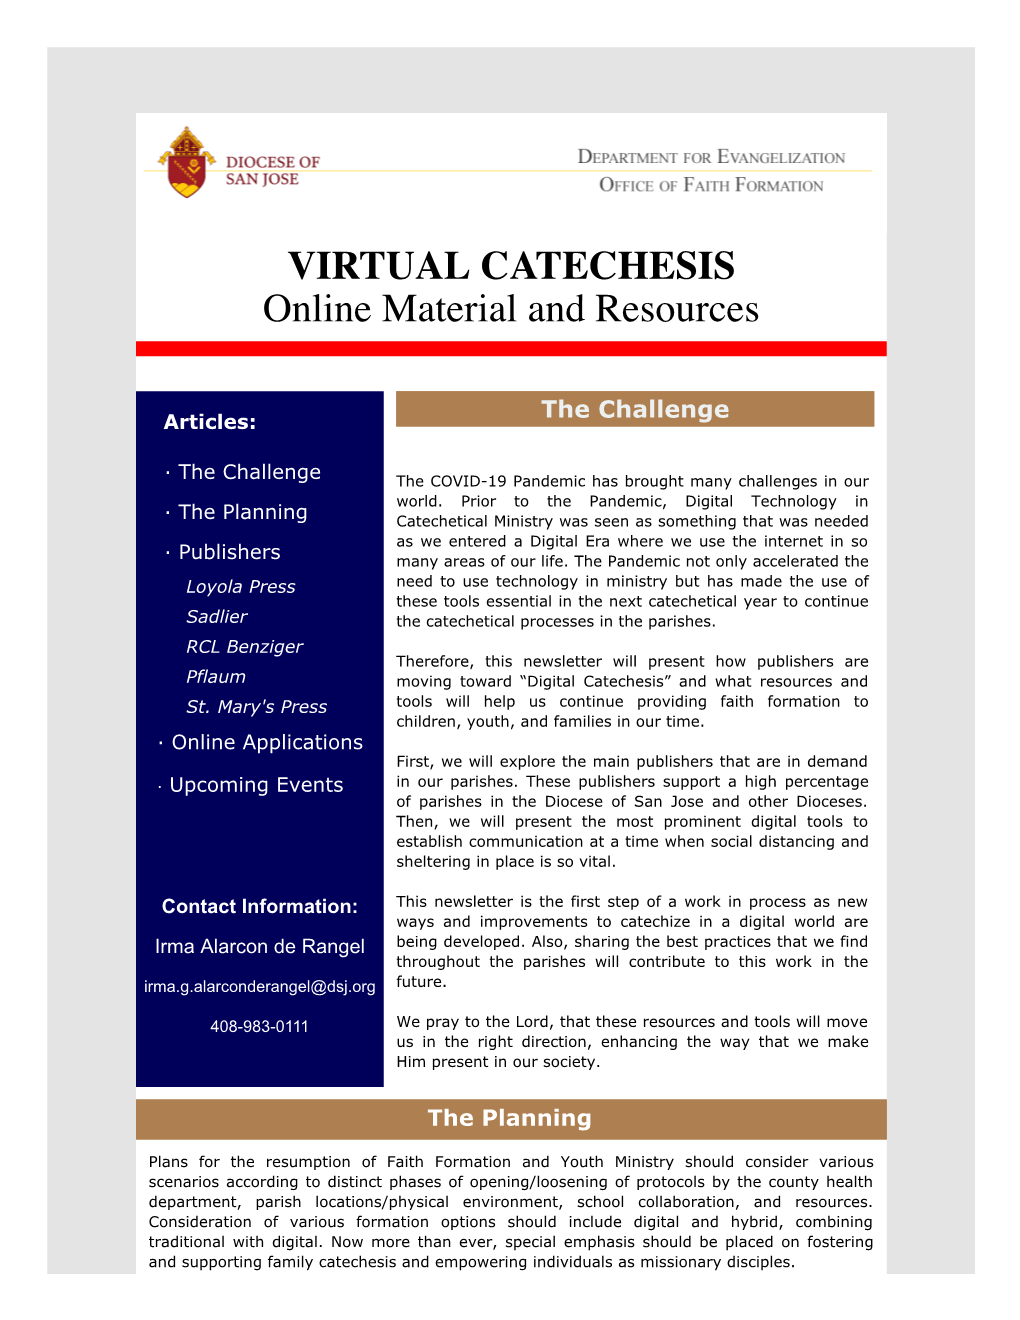 VIRTUAL CATECHESIS Online Material and Resources